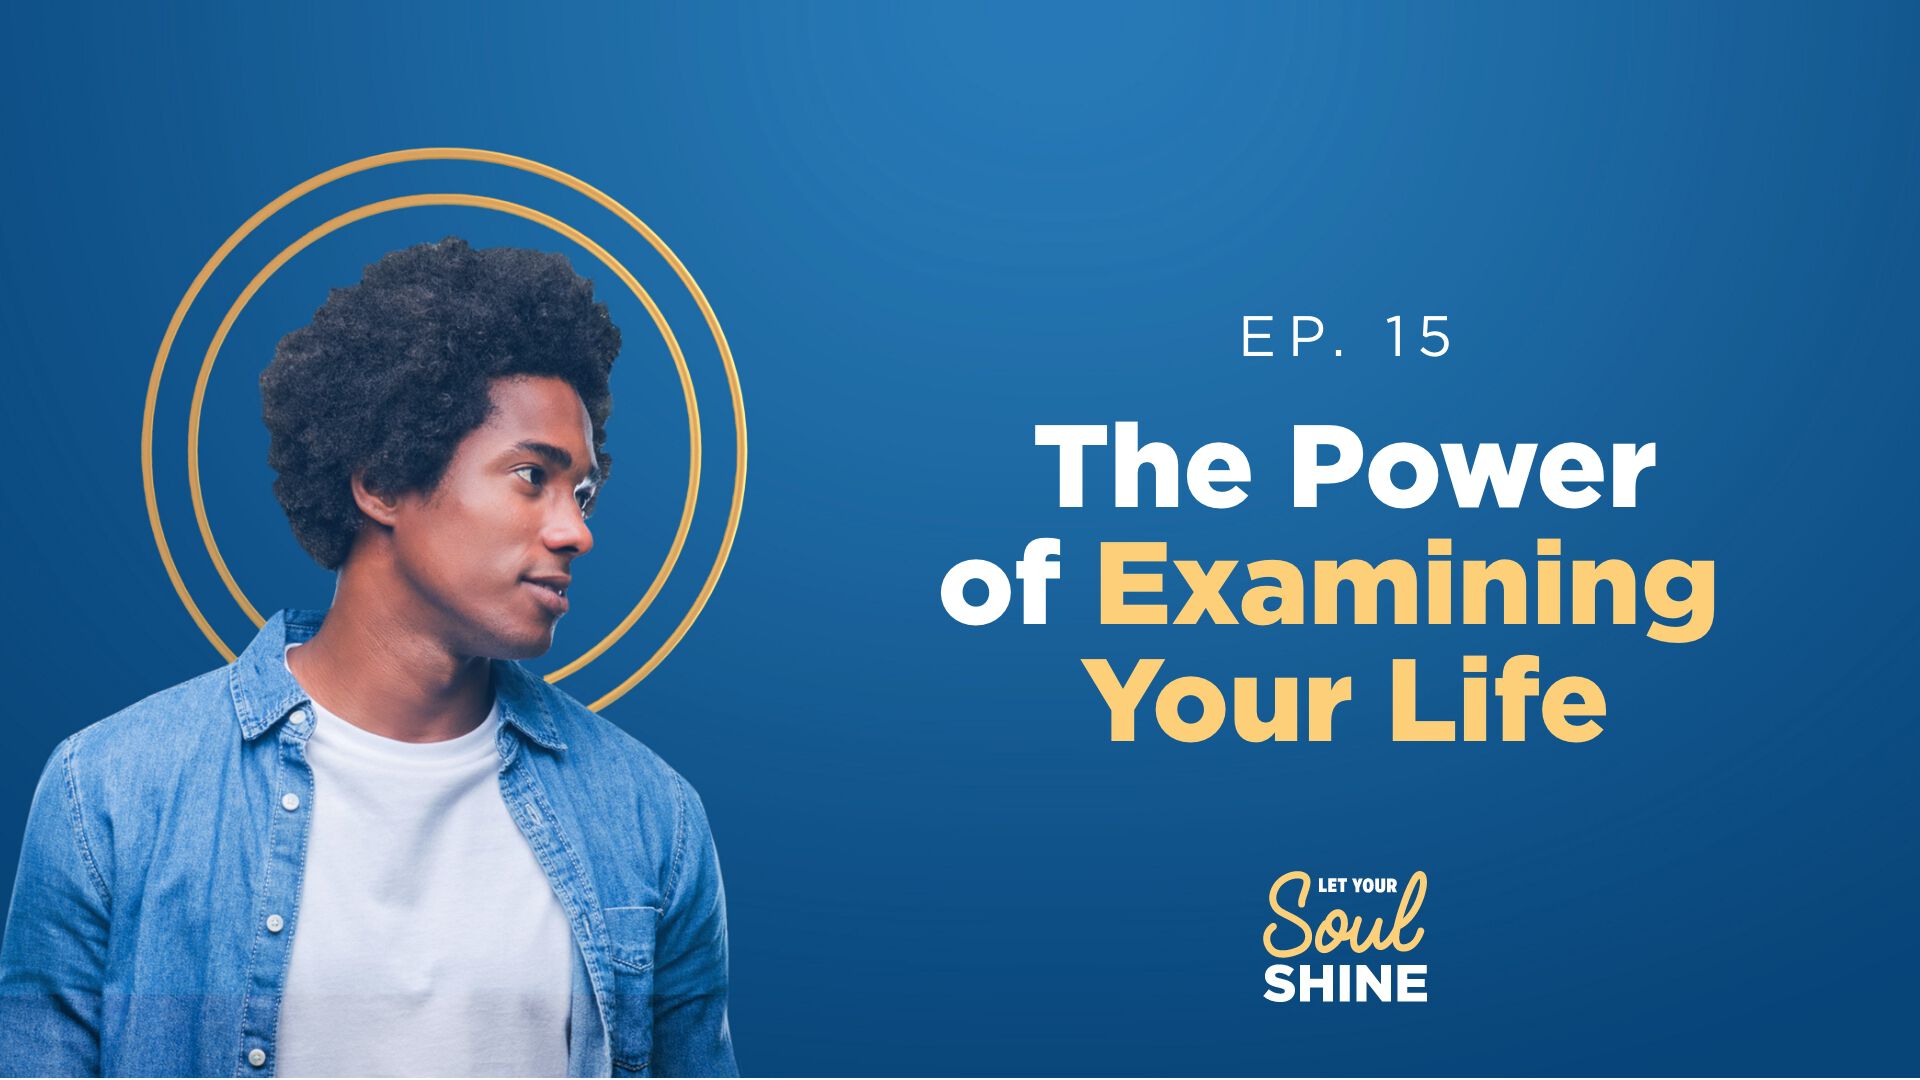 The power of examining your life